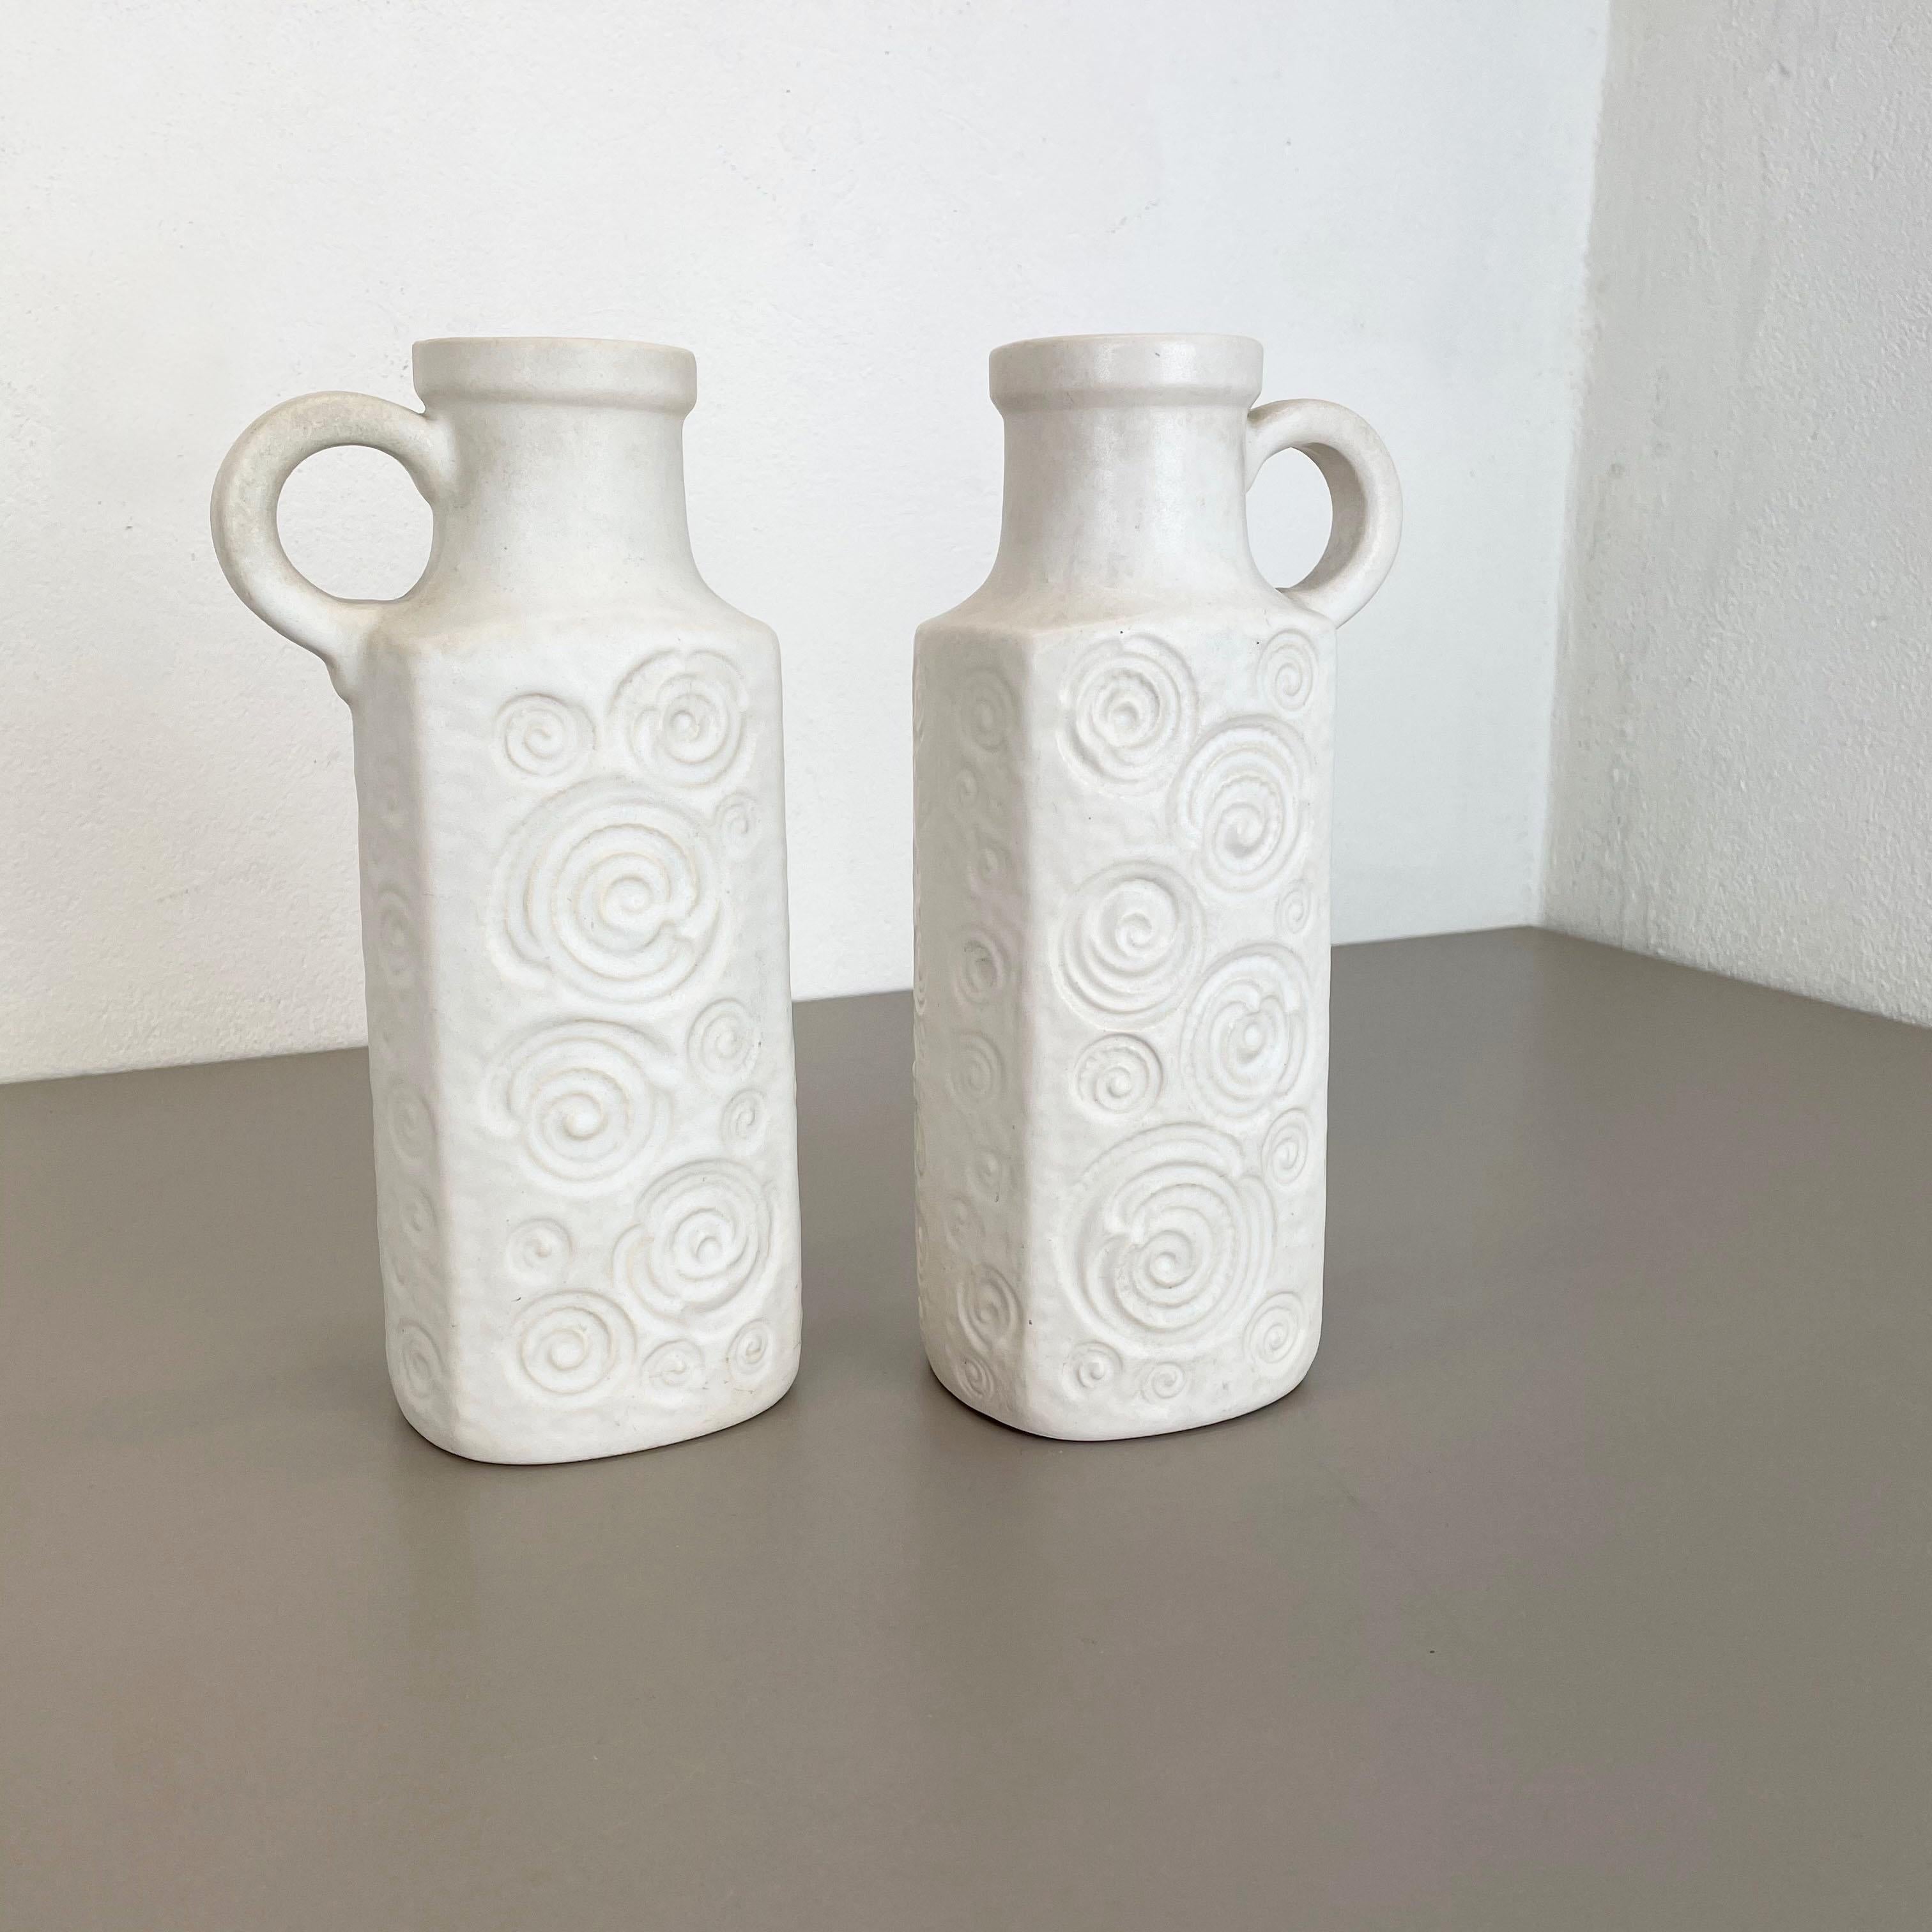 Article:

Set of two fat lava art vases

model: Jura 482-28


Producer:

Scheurich, Germany



Decade:

1970s


Description:

These original vintage vases was produced in the 1970s in Germany. It is made of ceramic pottery in fat